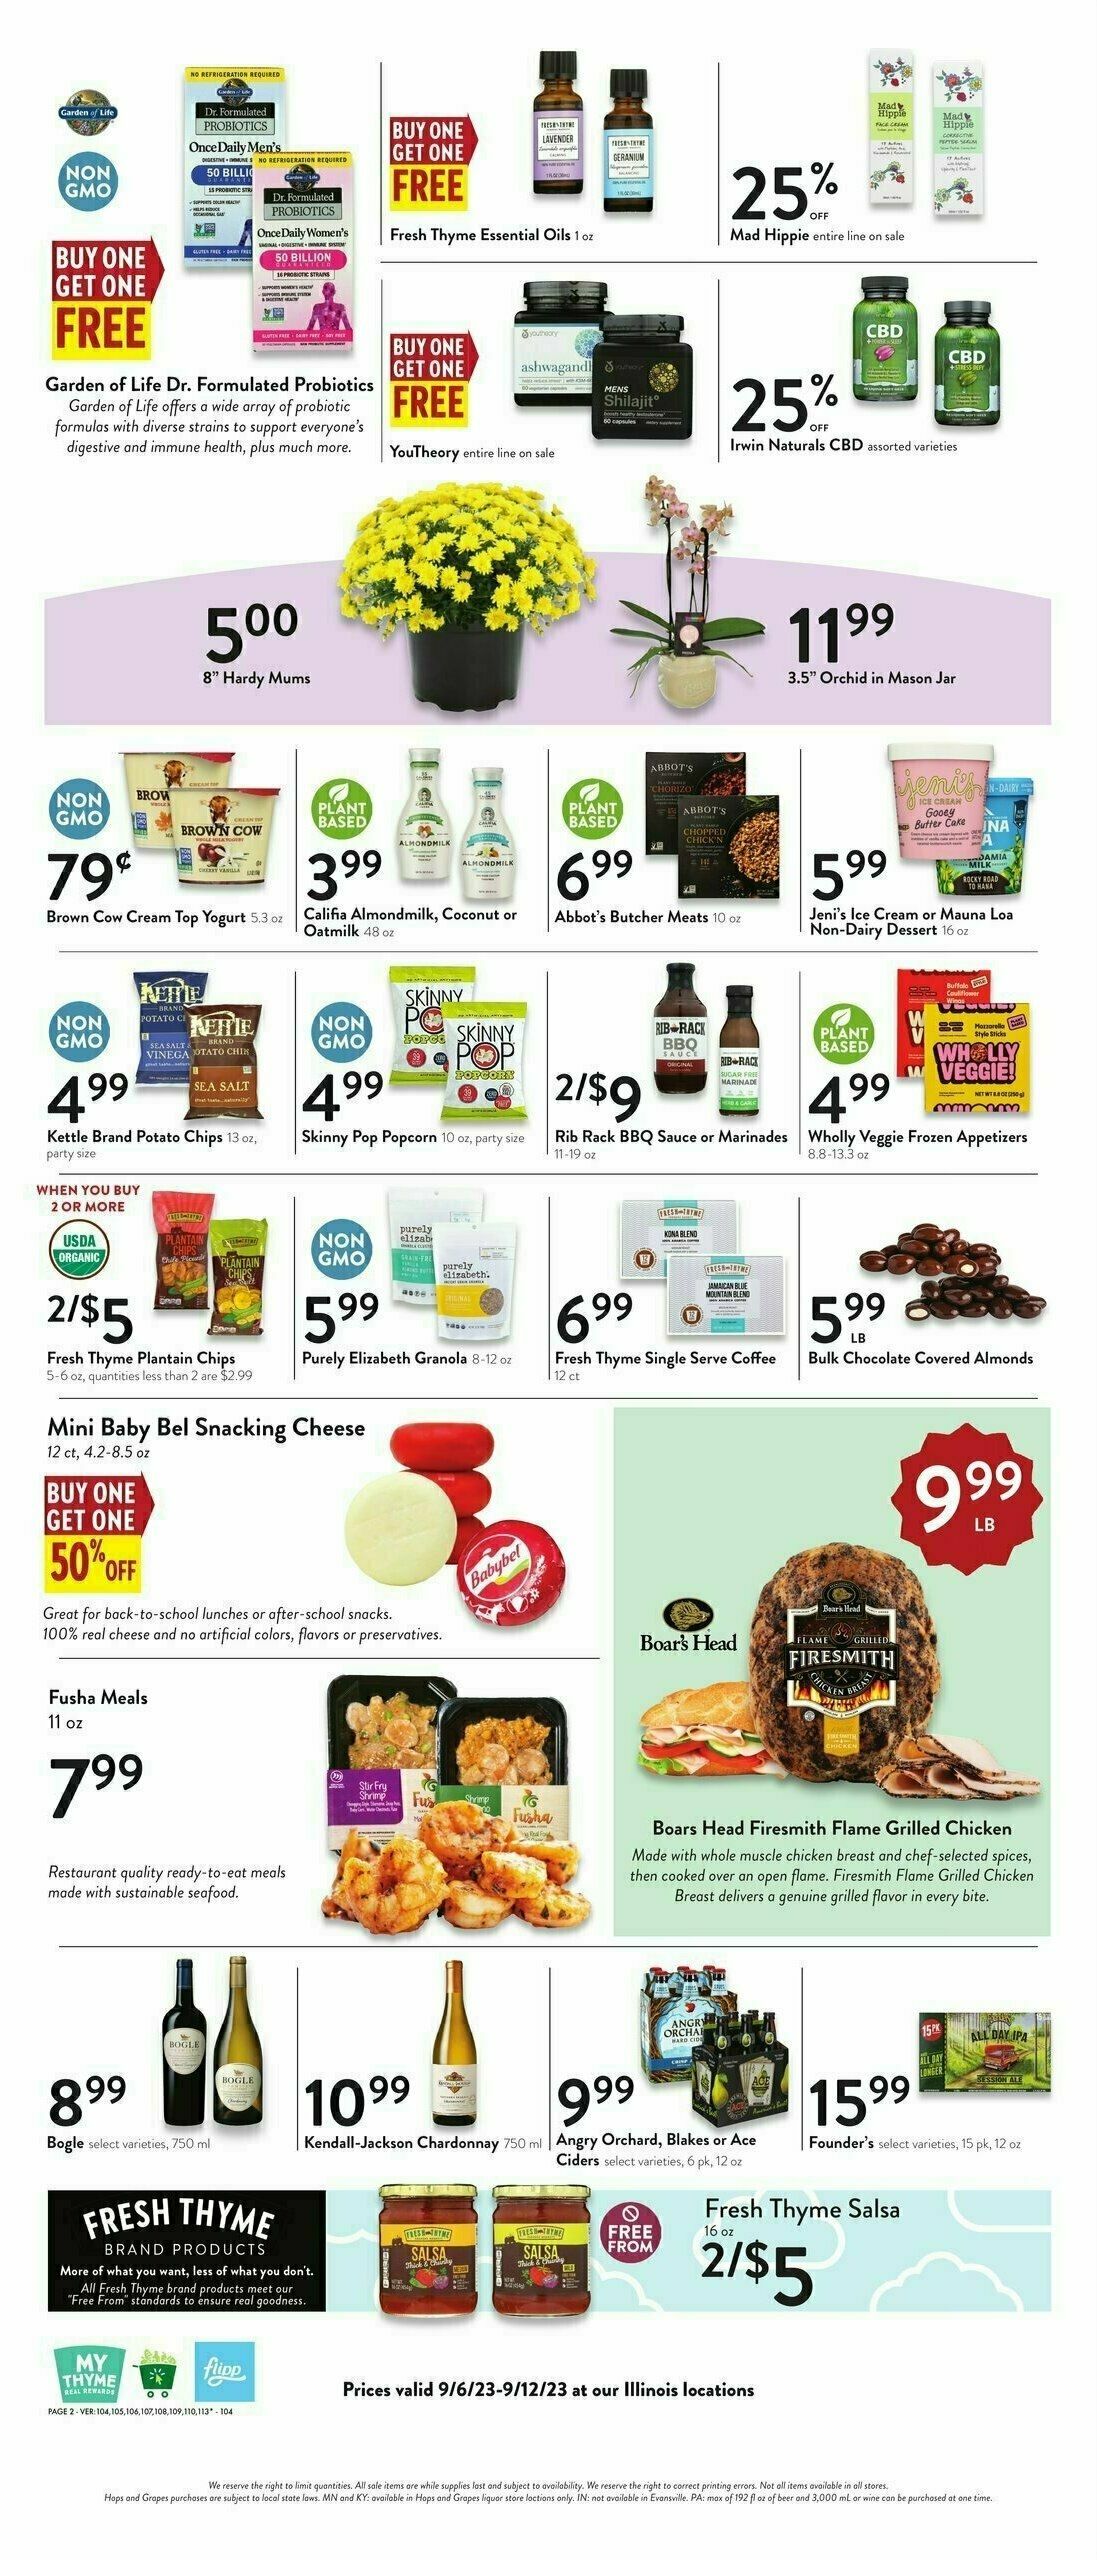 Fresh Thyme Farmers Market Weekly Ad from September 6